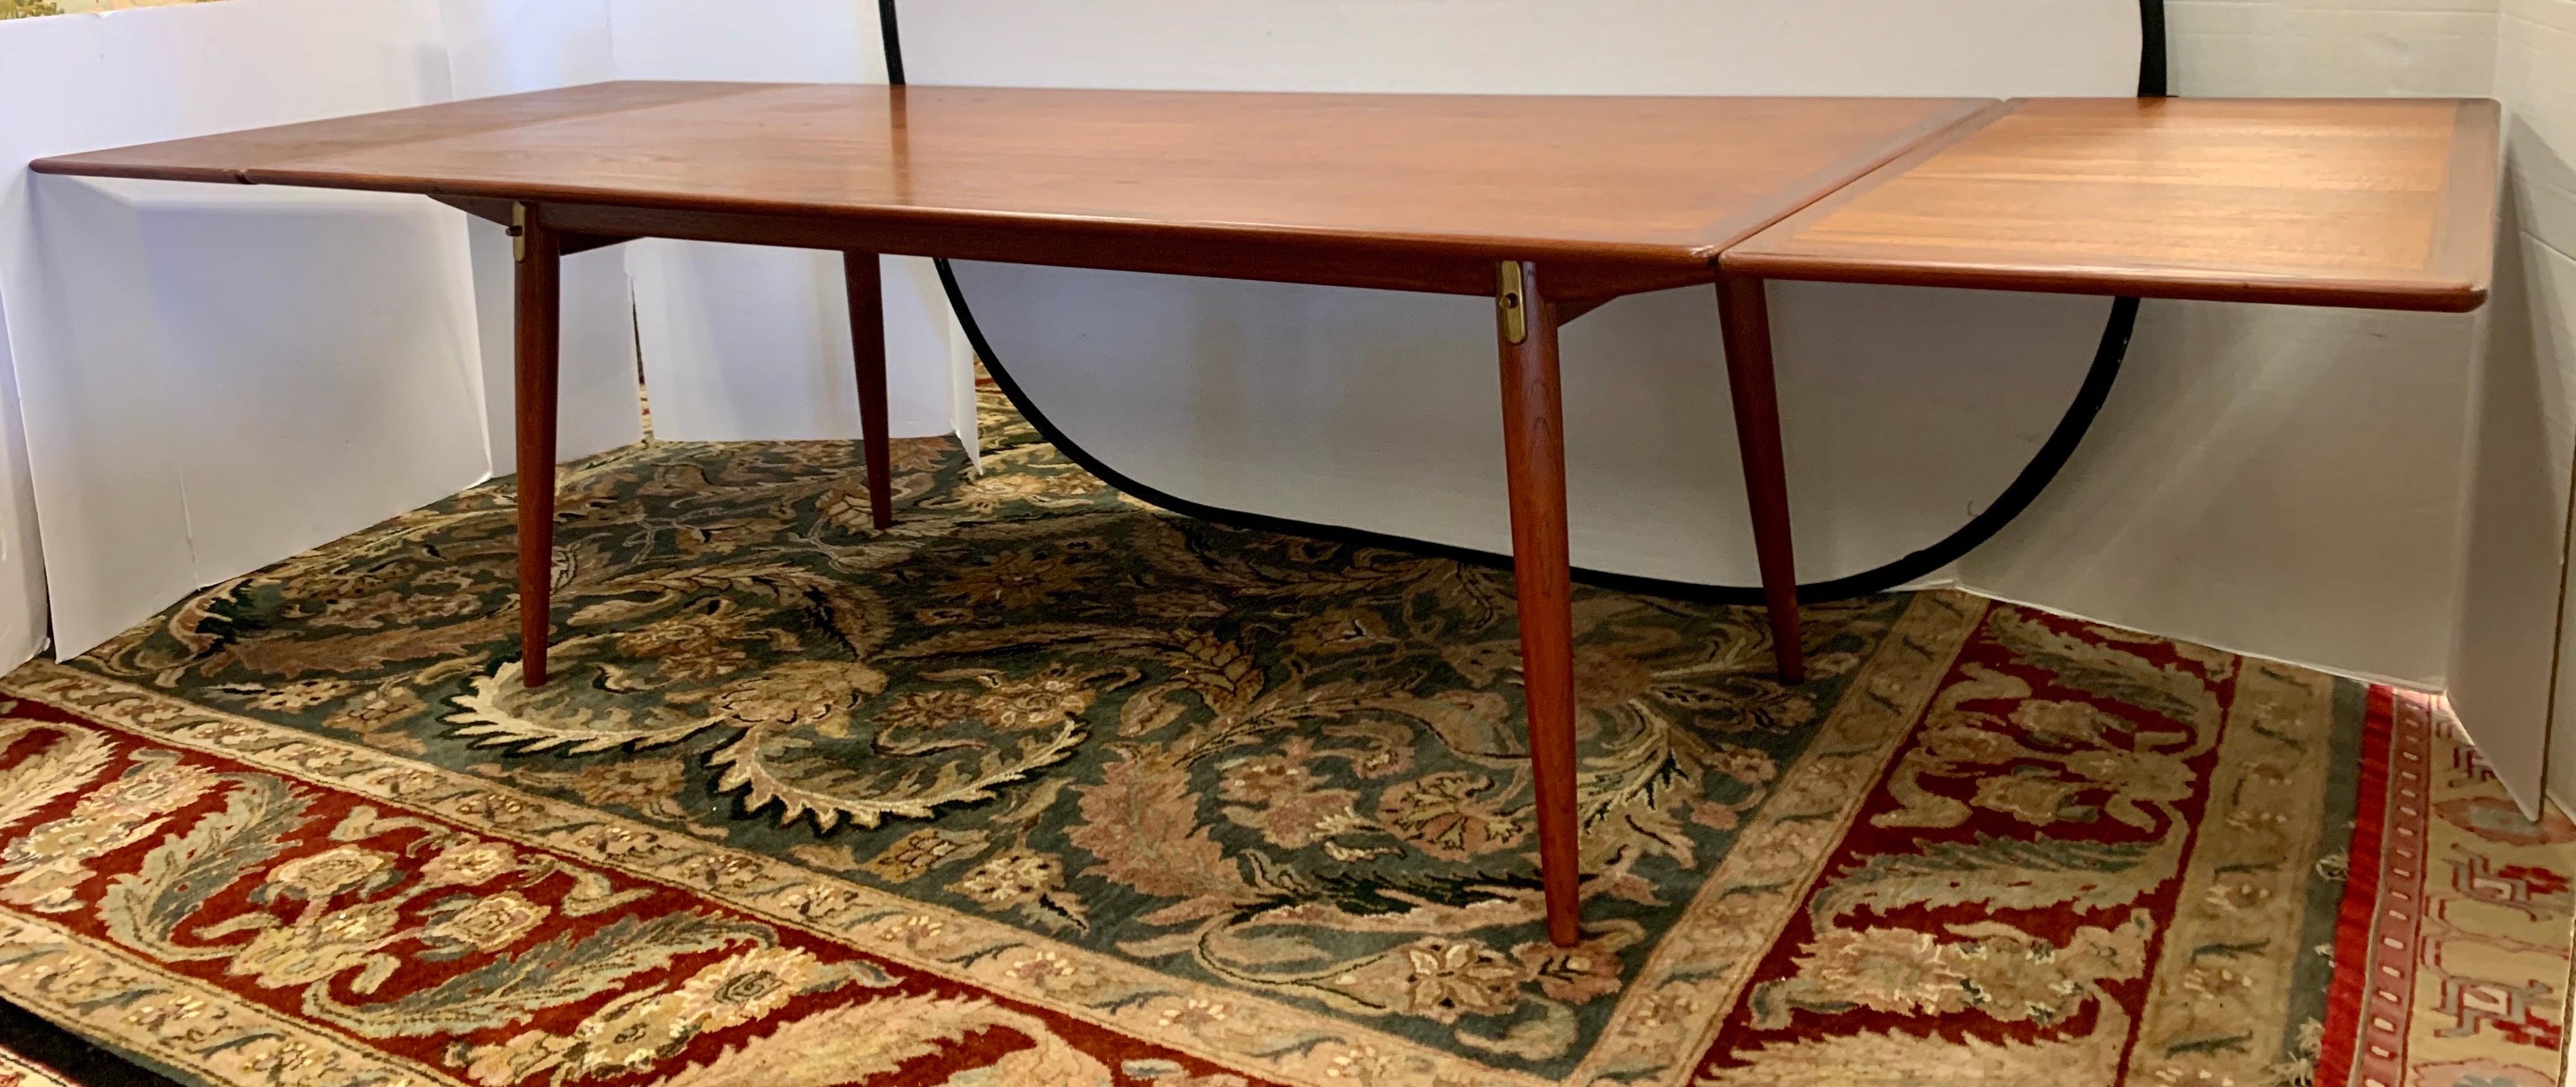 An ultra rare signed Johannes Hansen, Hans Wegner designed rectangular dining table with a teak top concealing steel and brass pullouts and an innovative hidden leaf storage on a fumed oak base with splayed, tapered dowel legs. The leaves are hidden